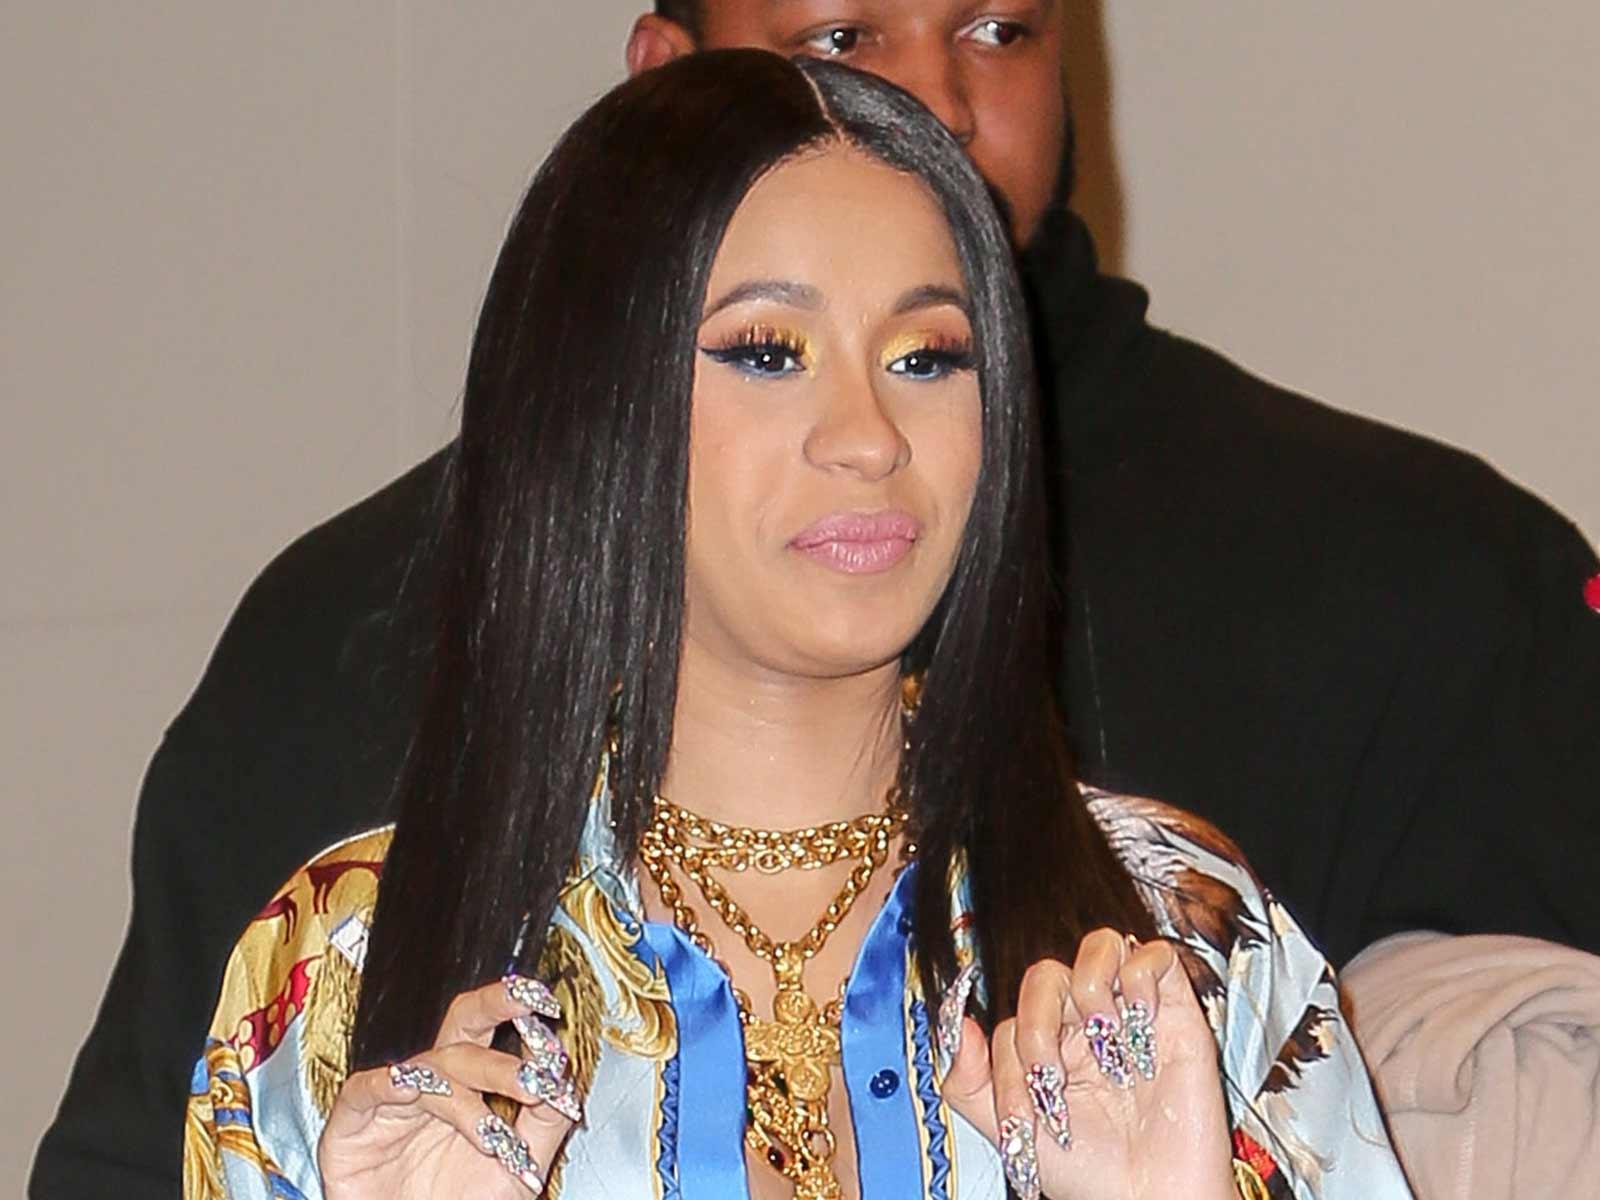 Cardi B Denies Transphobic Facebook Message Came From Her